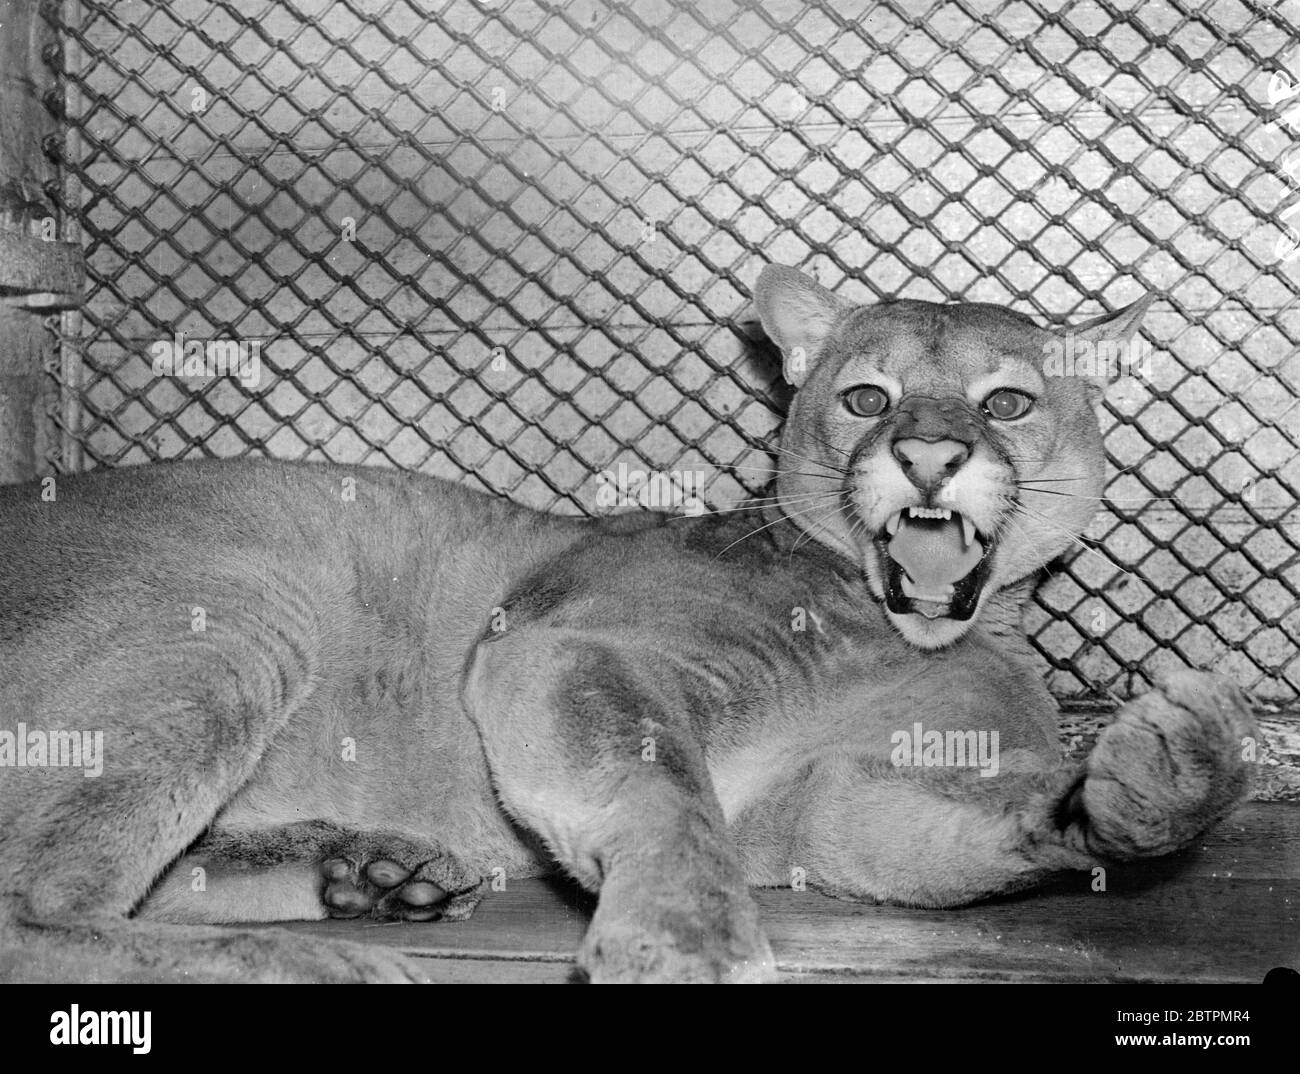 Patrick says . Pat says is ' good morning ' ! . Fangs barre in a snarl and baleful eyes glaring Patrick , the Brazilian puma warns of unwelcome visitors to his den in the North Manmal ' house at the London Zoo . 13 February 1937 Stock Photo